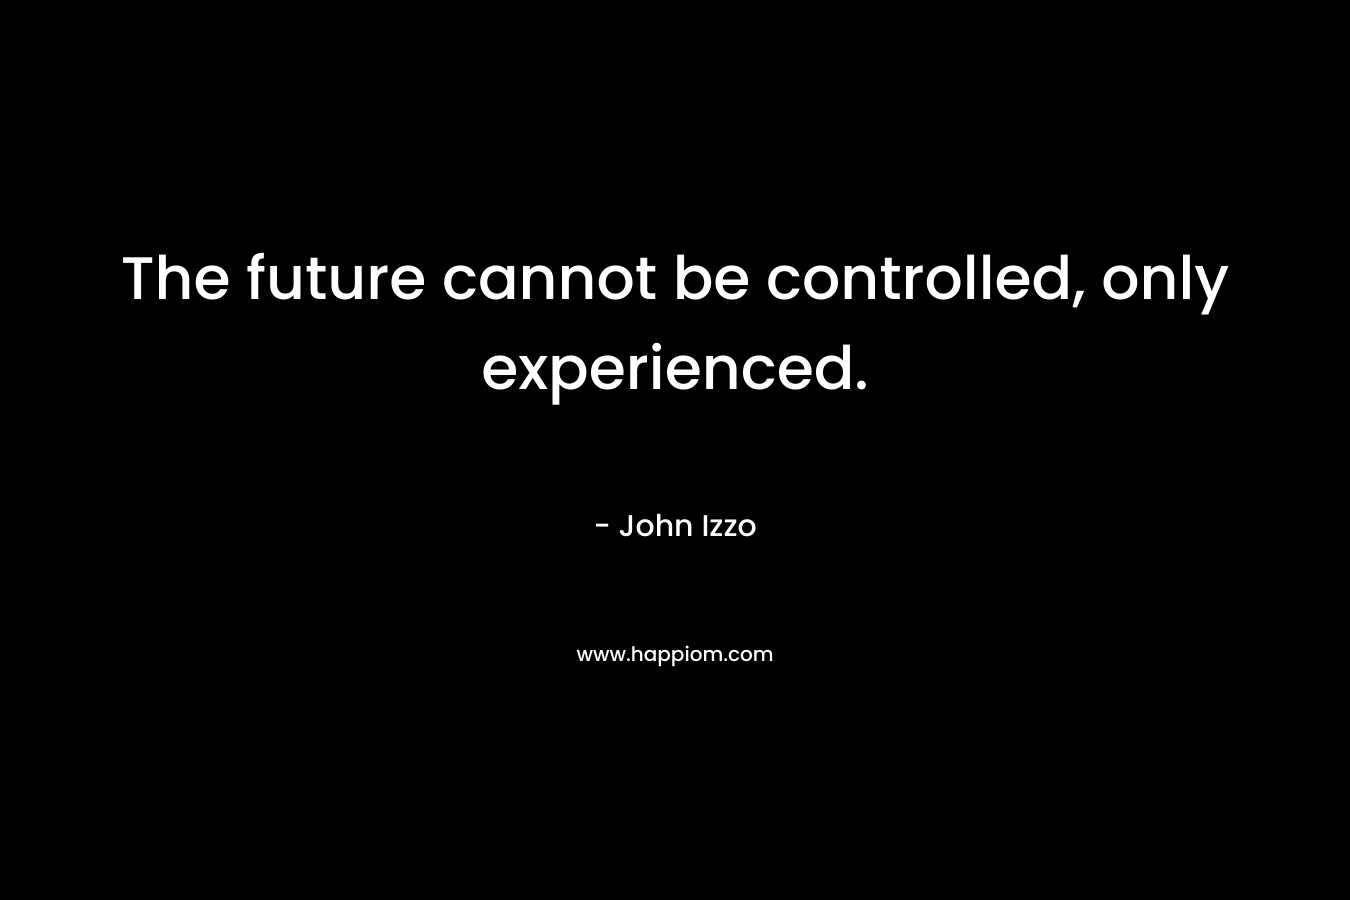 The future cannot be controlled, only experienced.